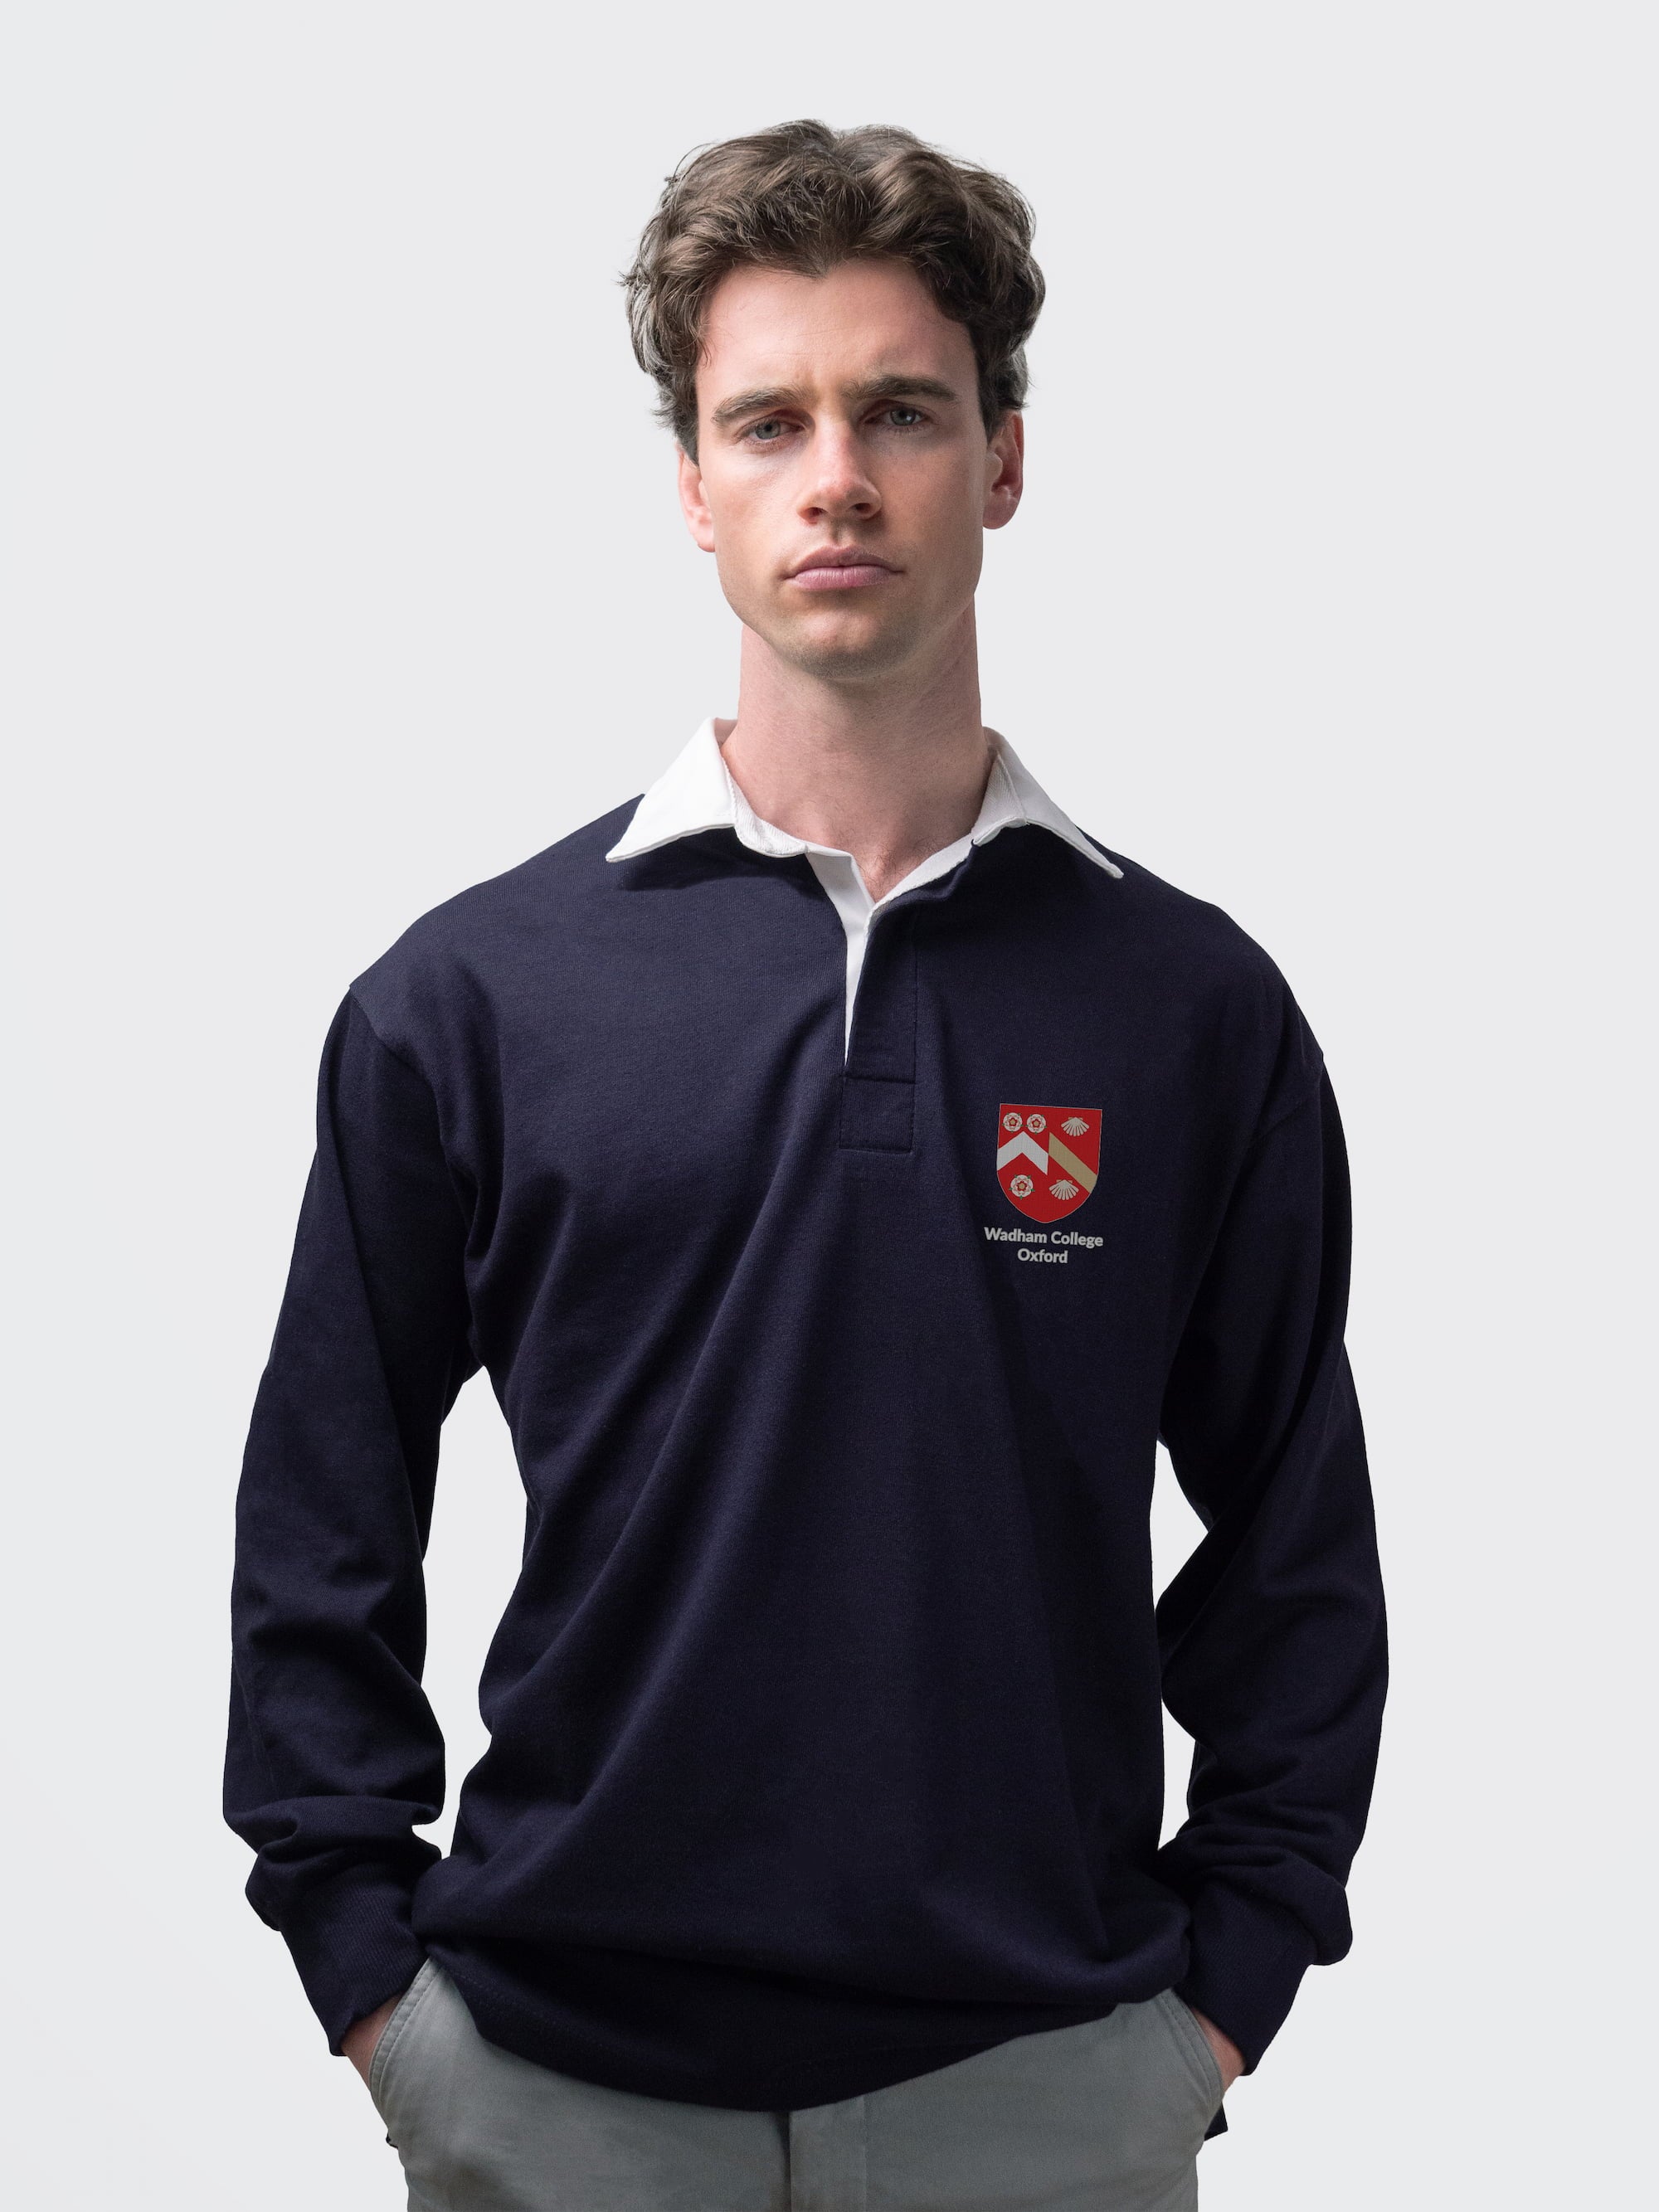 Wadham student wearing an embroidered mens rugby shirt in navy